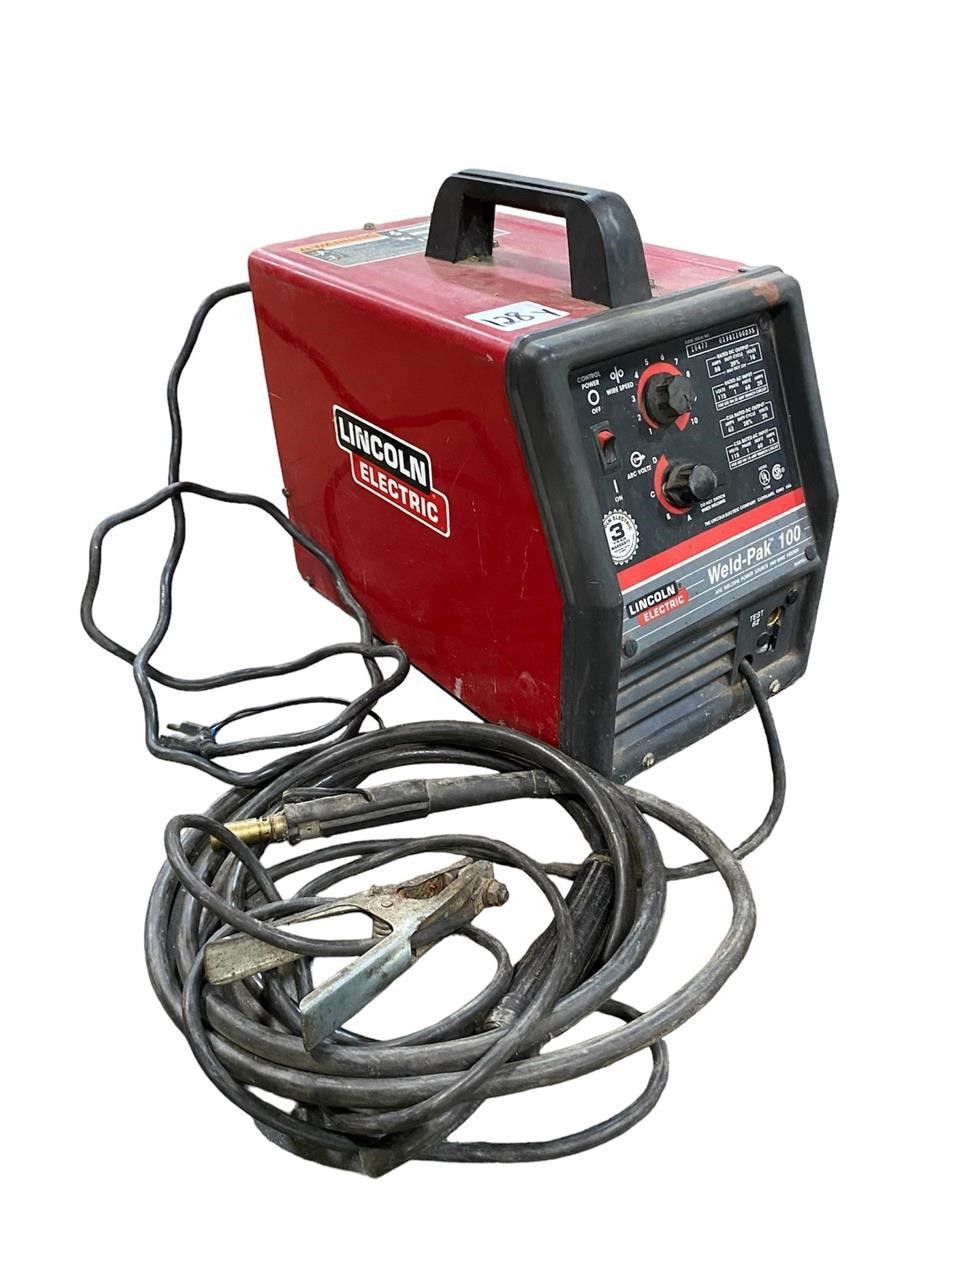 Lincoln Electric Weld-Pak 100 Welder. Used